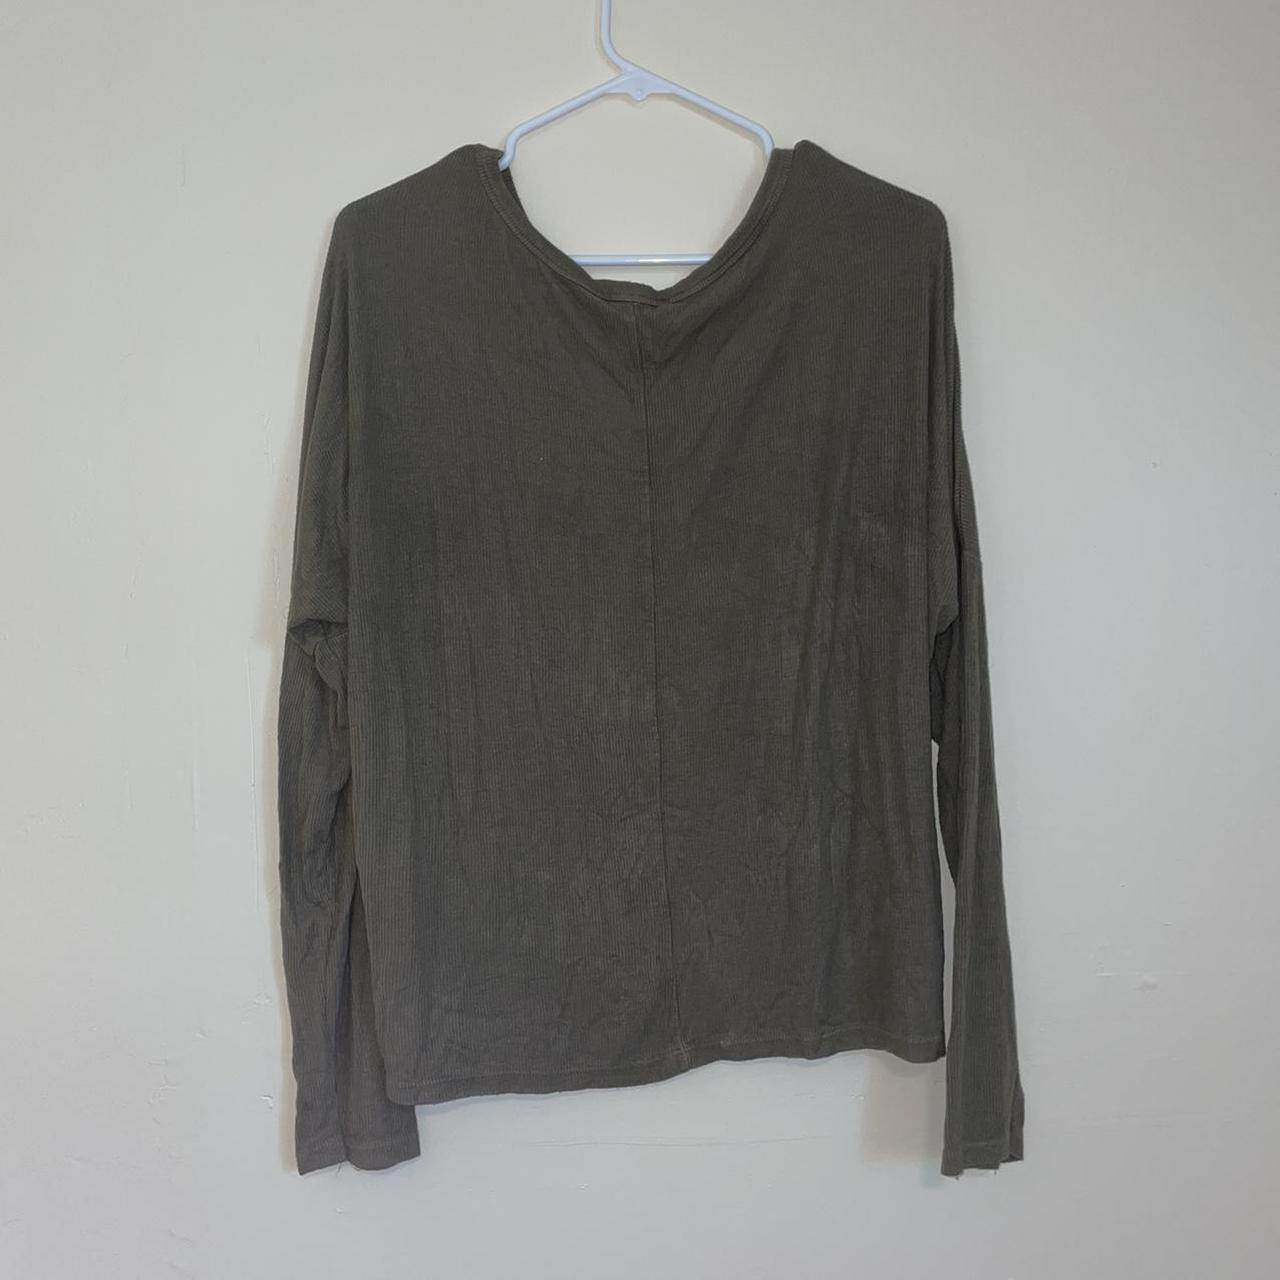 Brandy Melville Bonnie tops in Olive green and - Depop